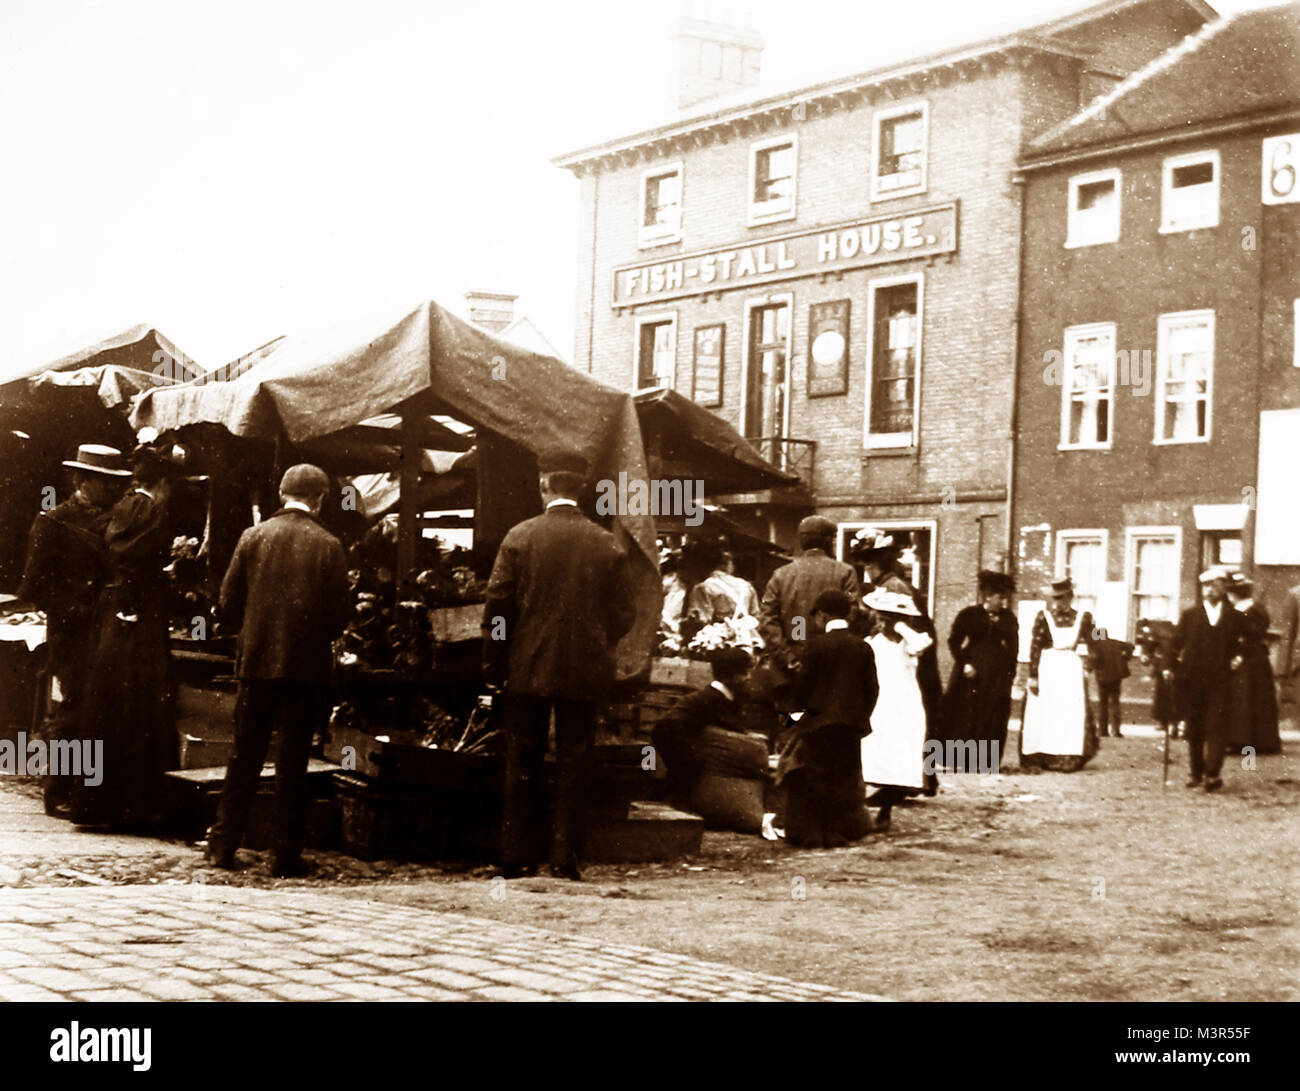 Fish Stall House pub, Great Yarmouth, early 1900s Stock Photo